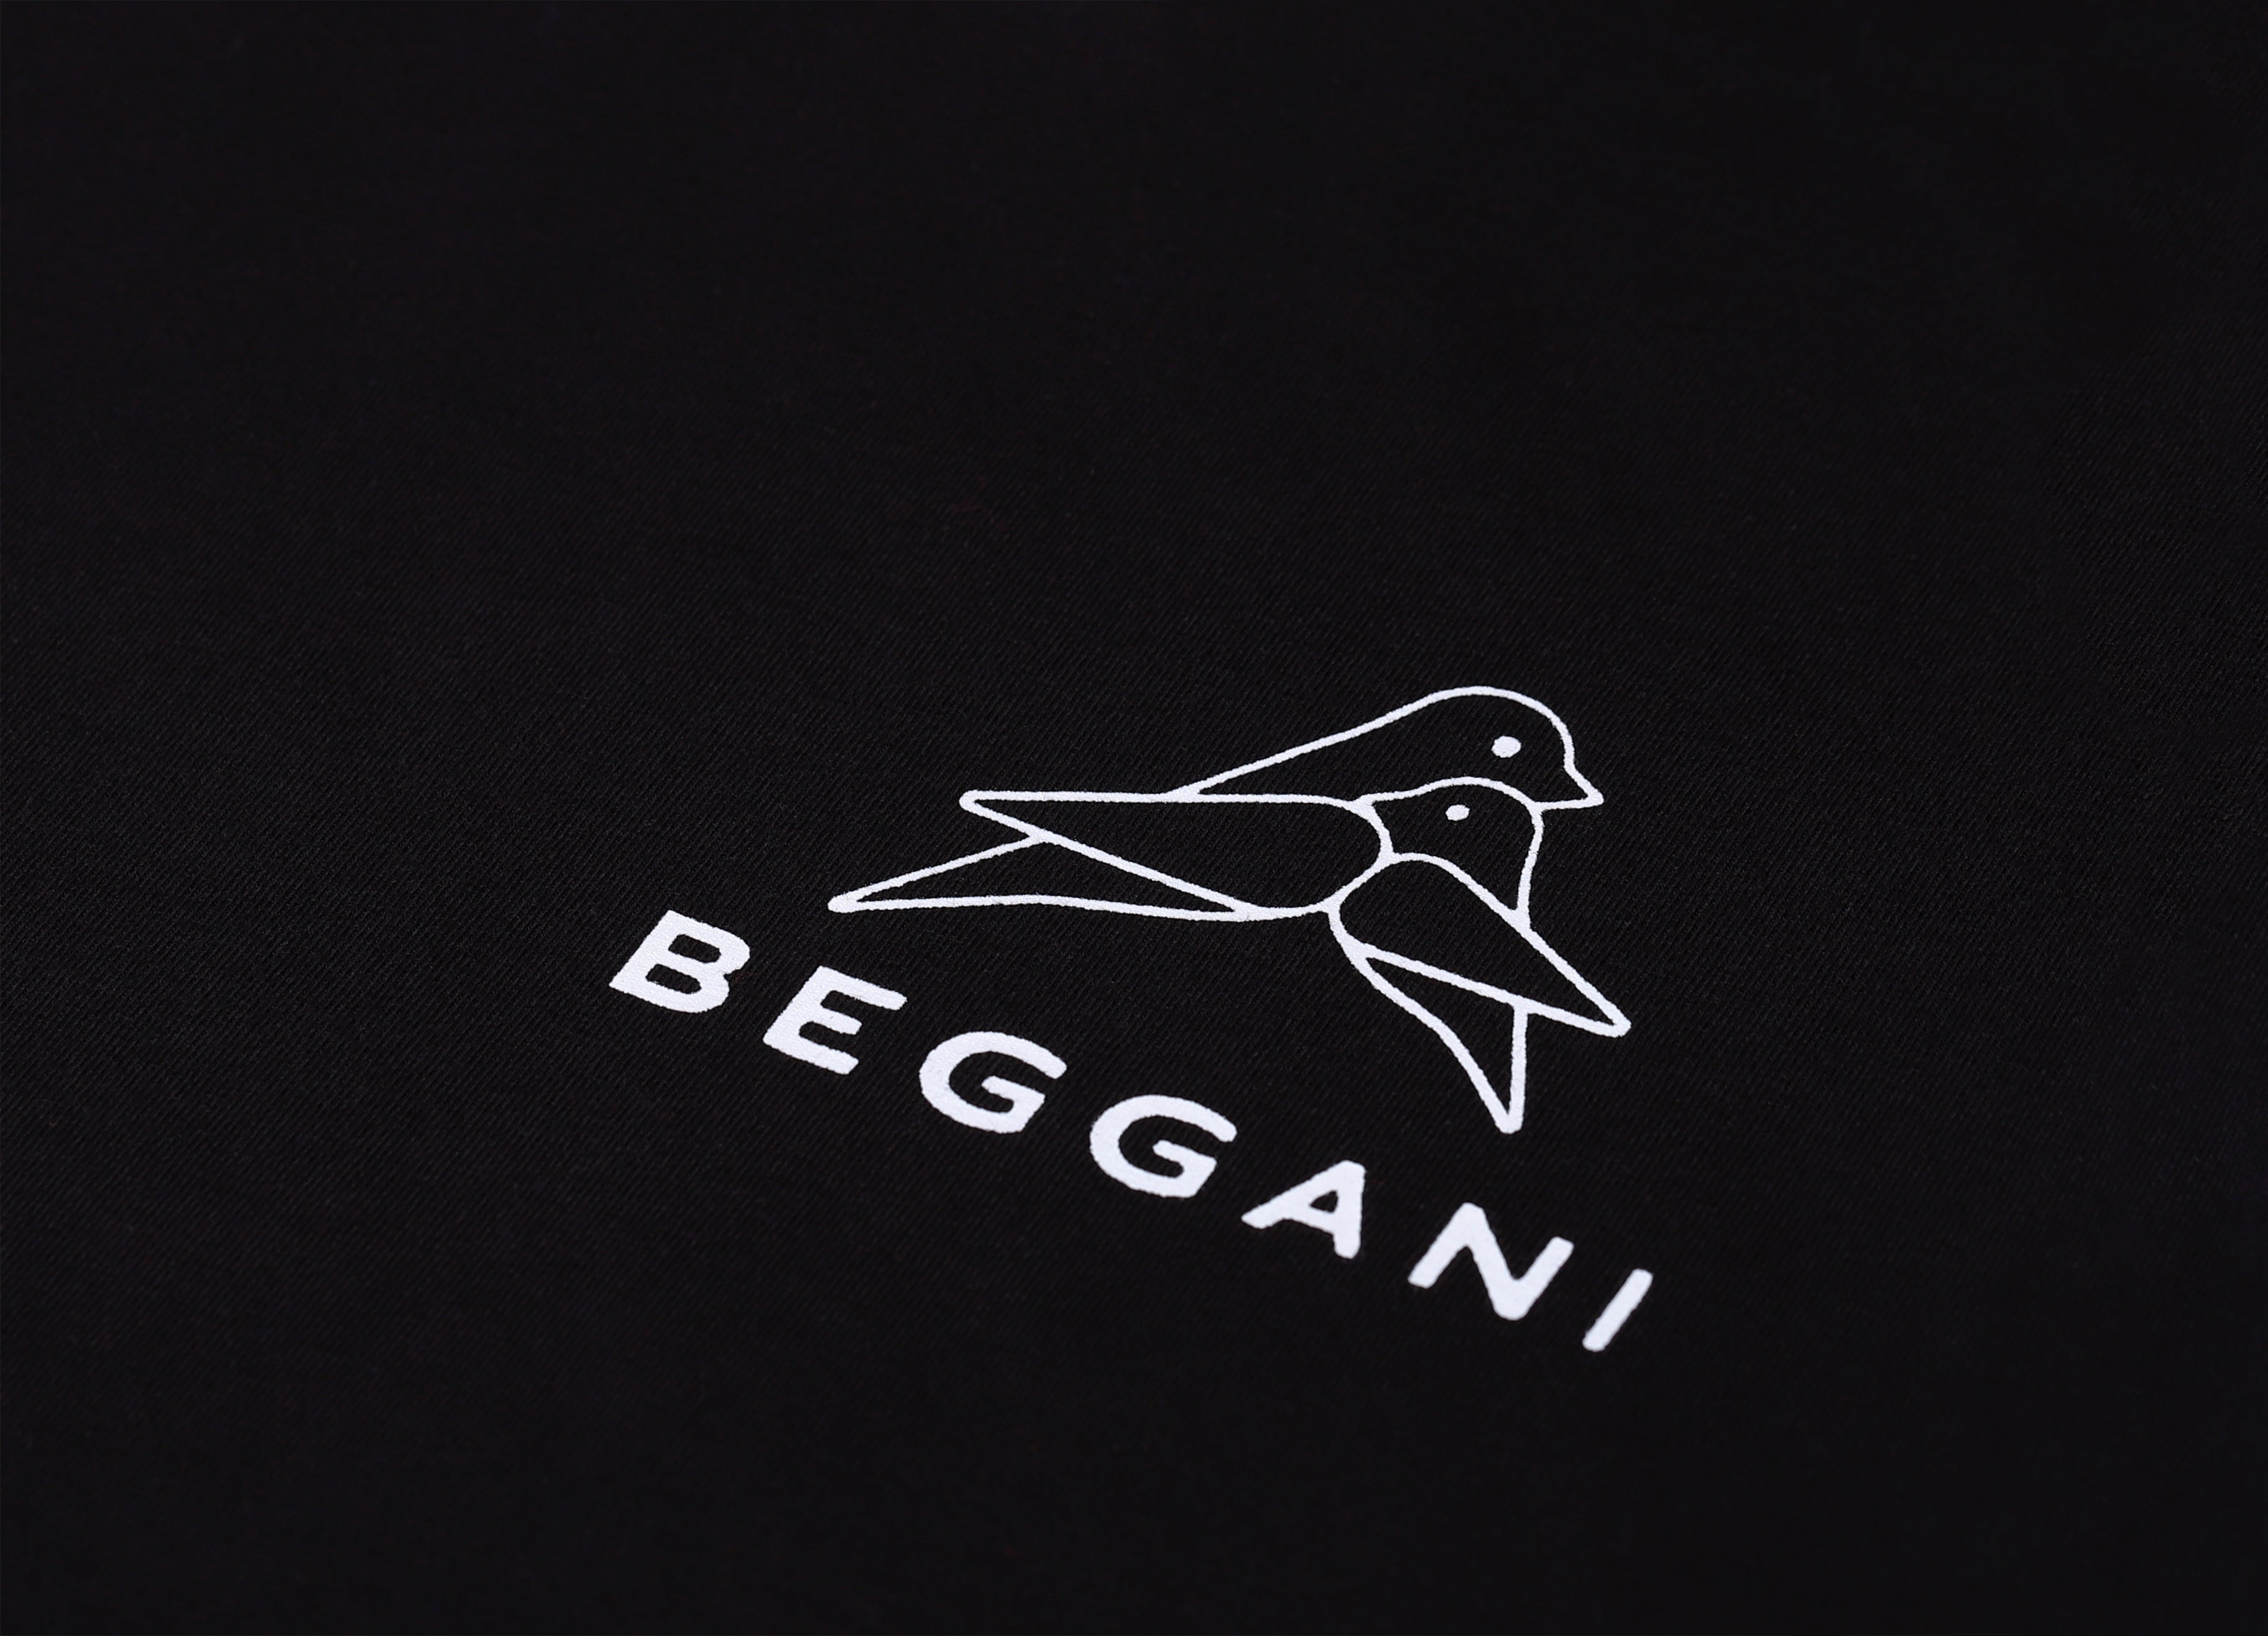 T-Shirt with a contrasting BEGGANI Logo